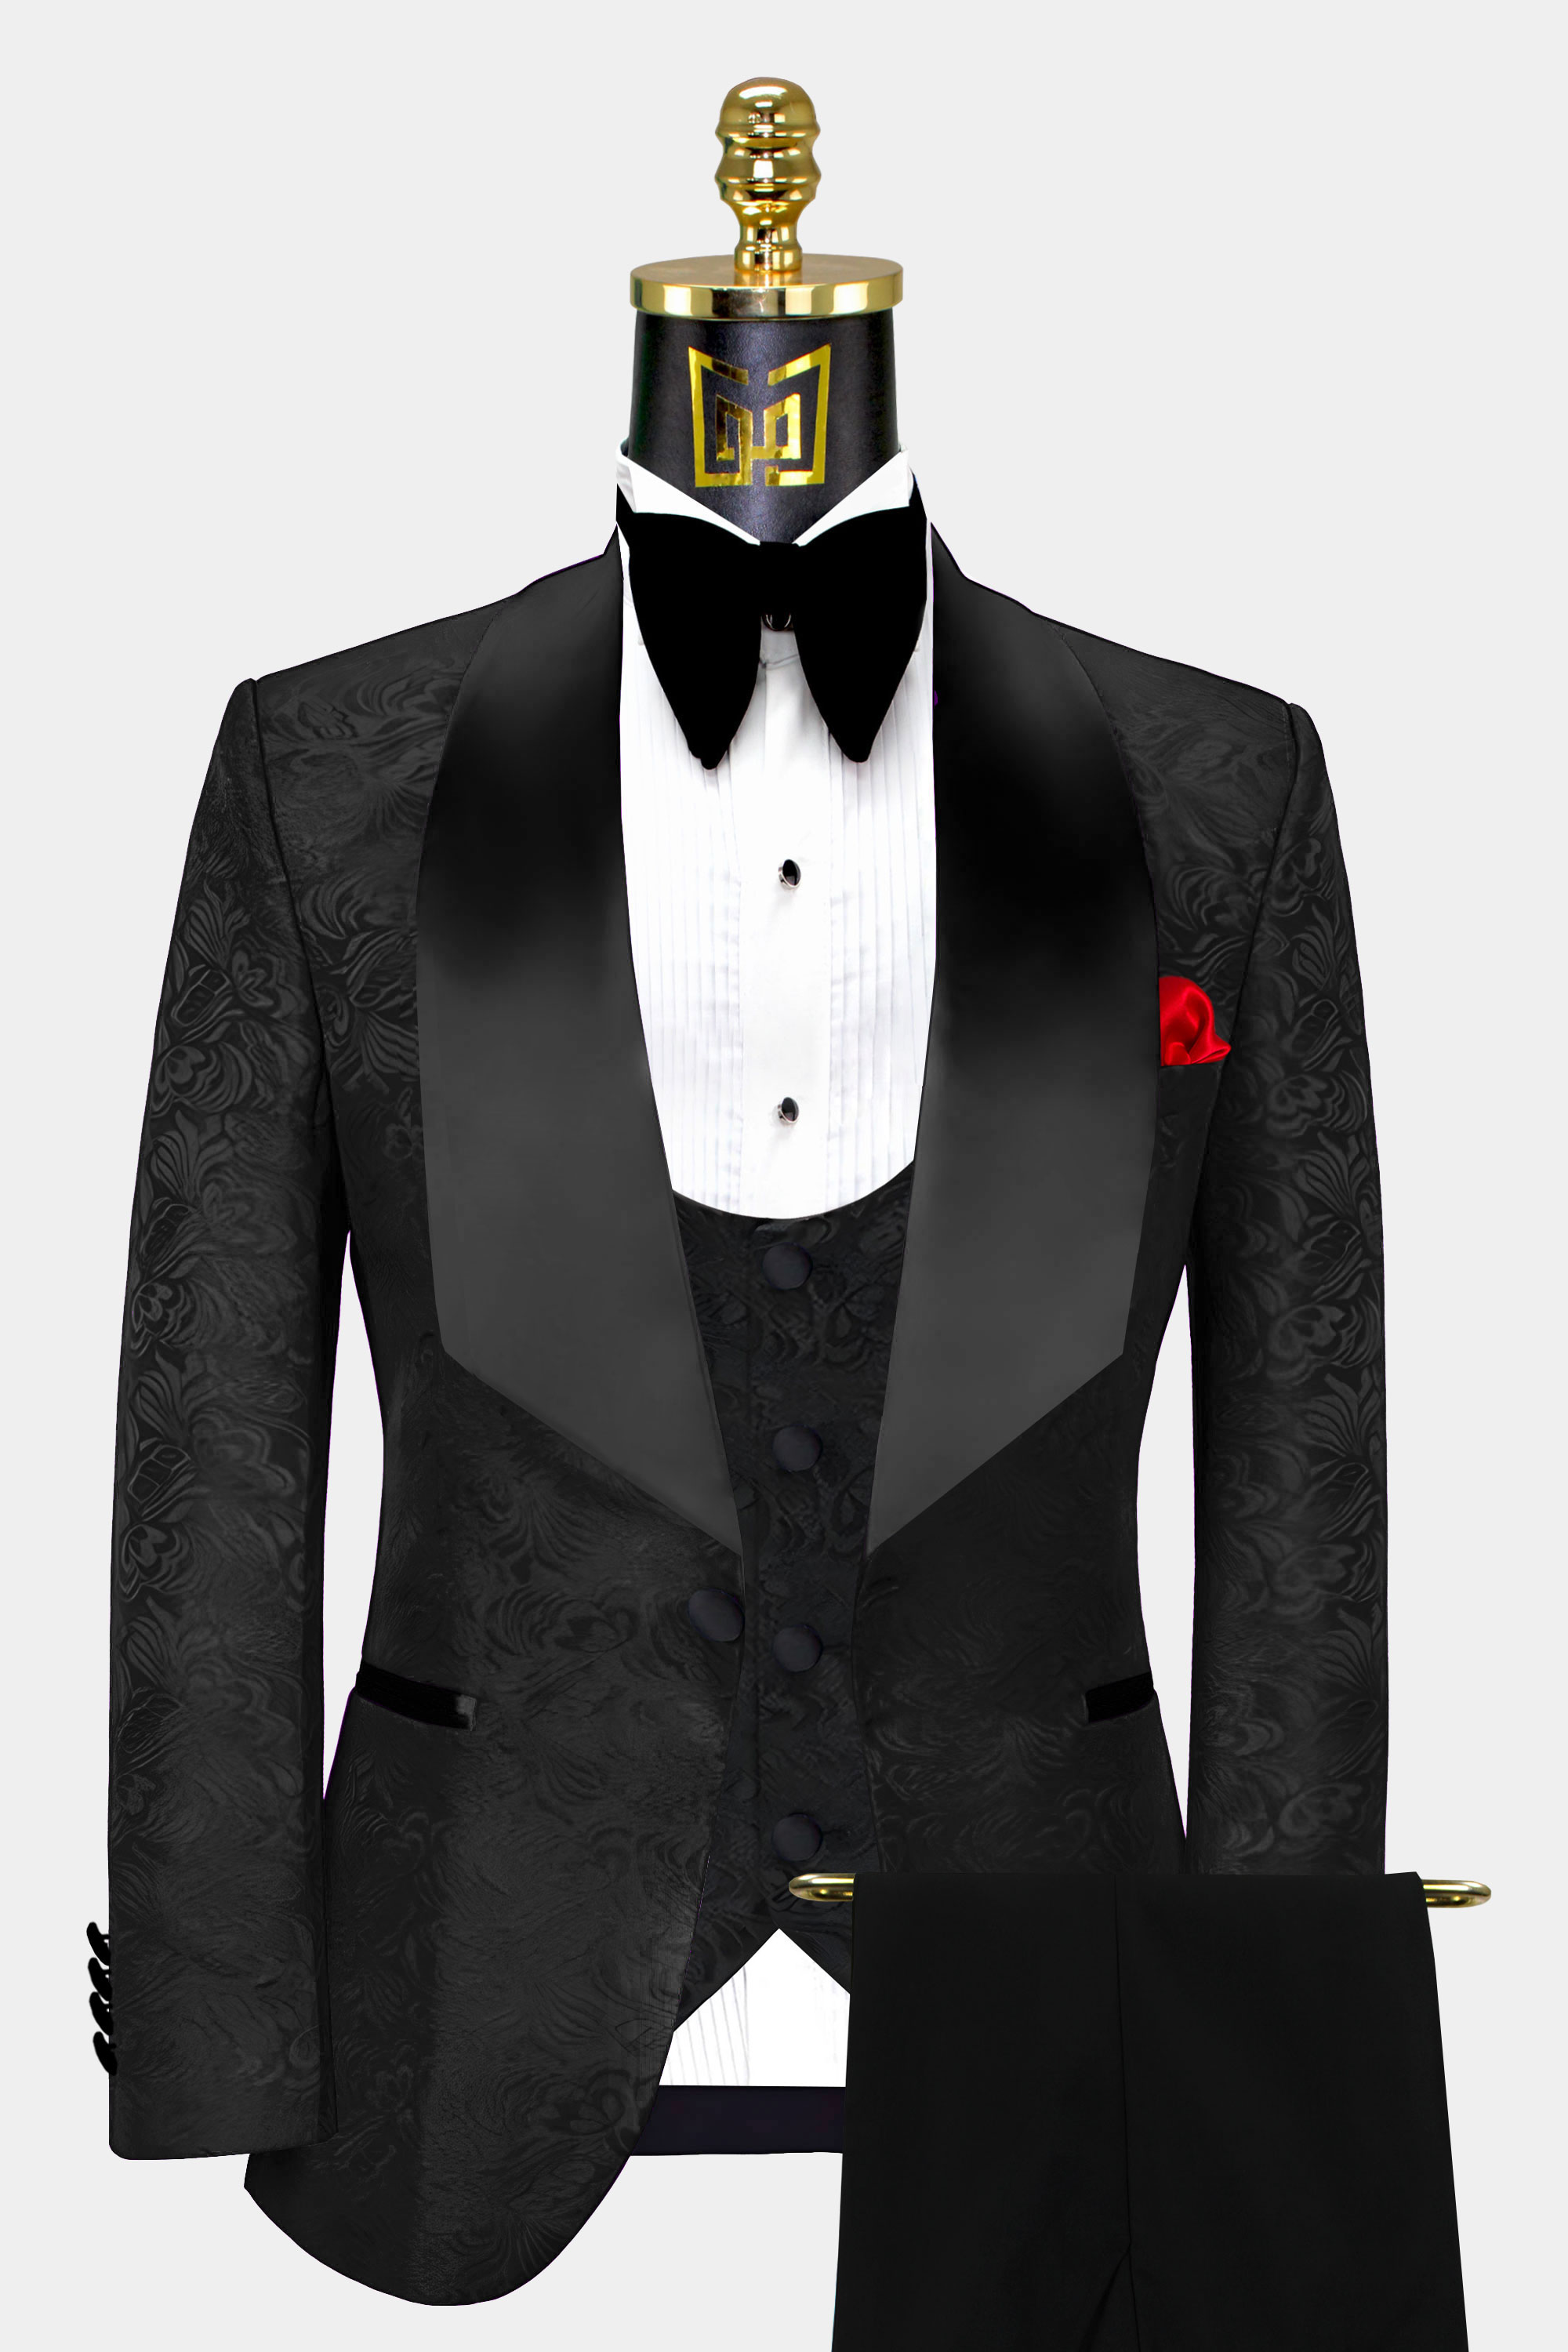 Floral All Black Tuxedo with Shawl Lapel - 3 Piece